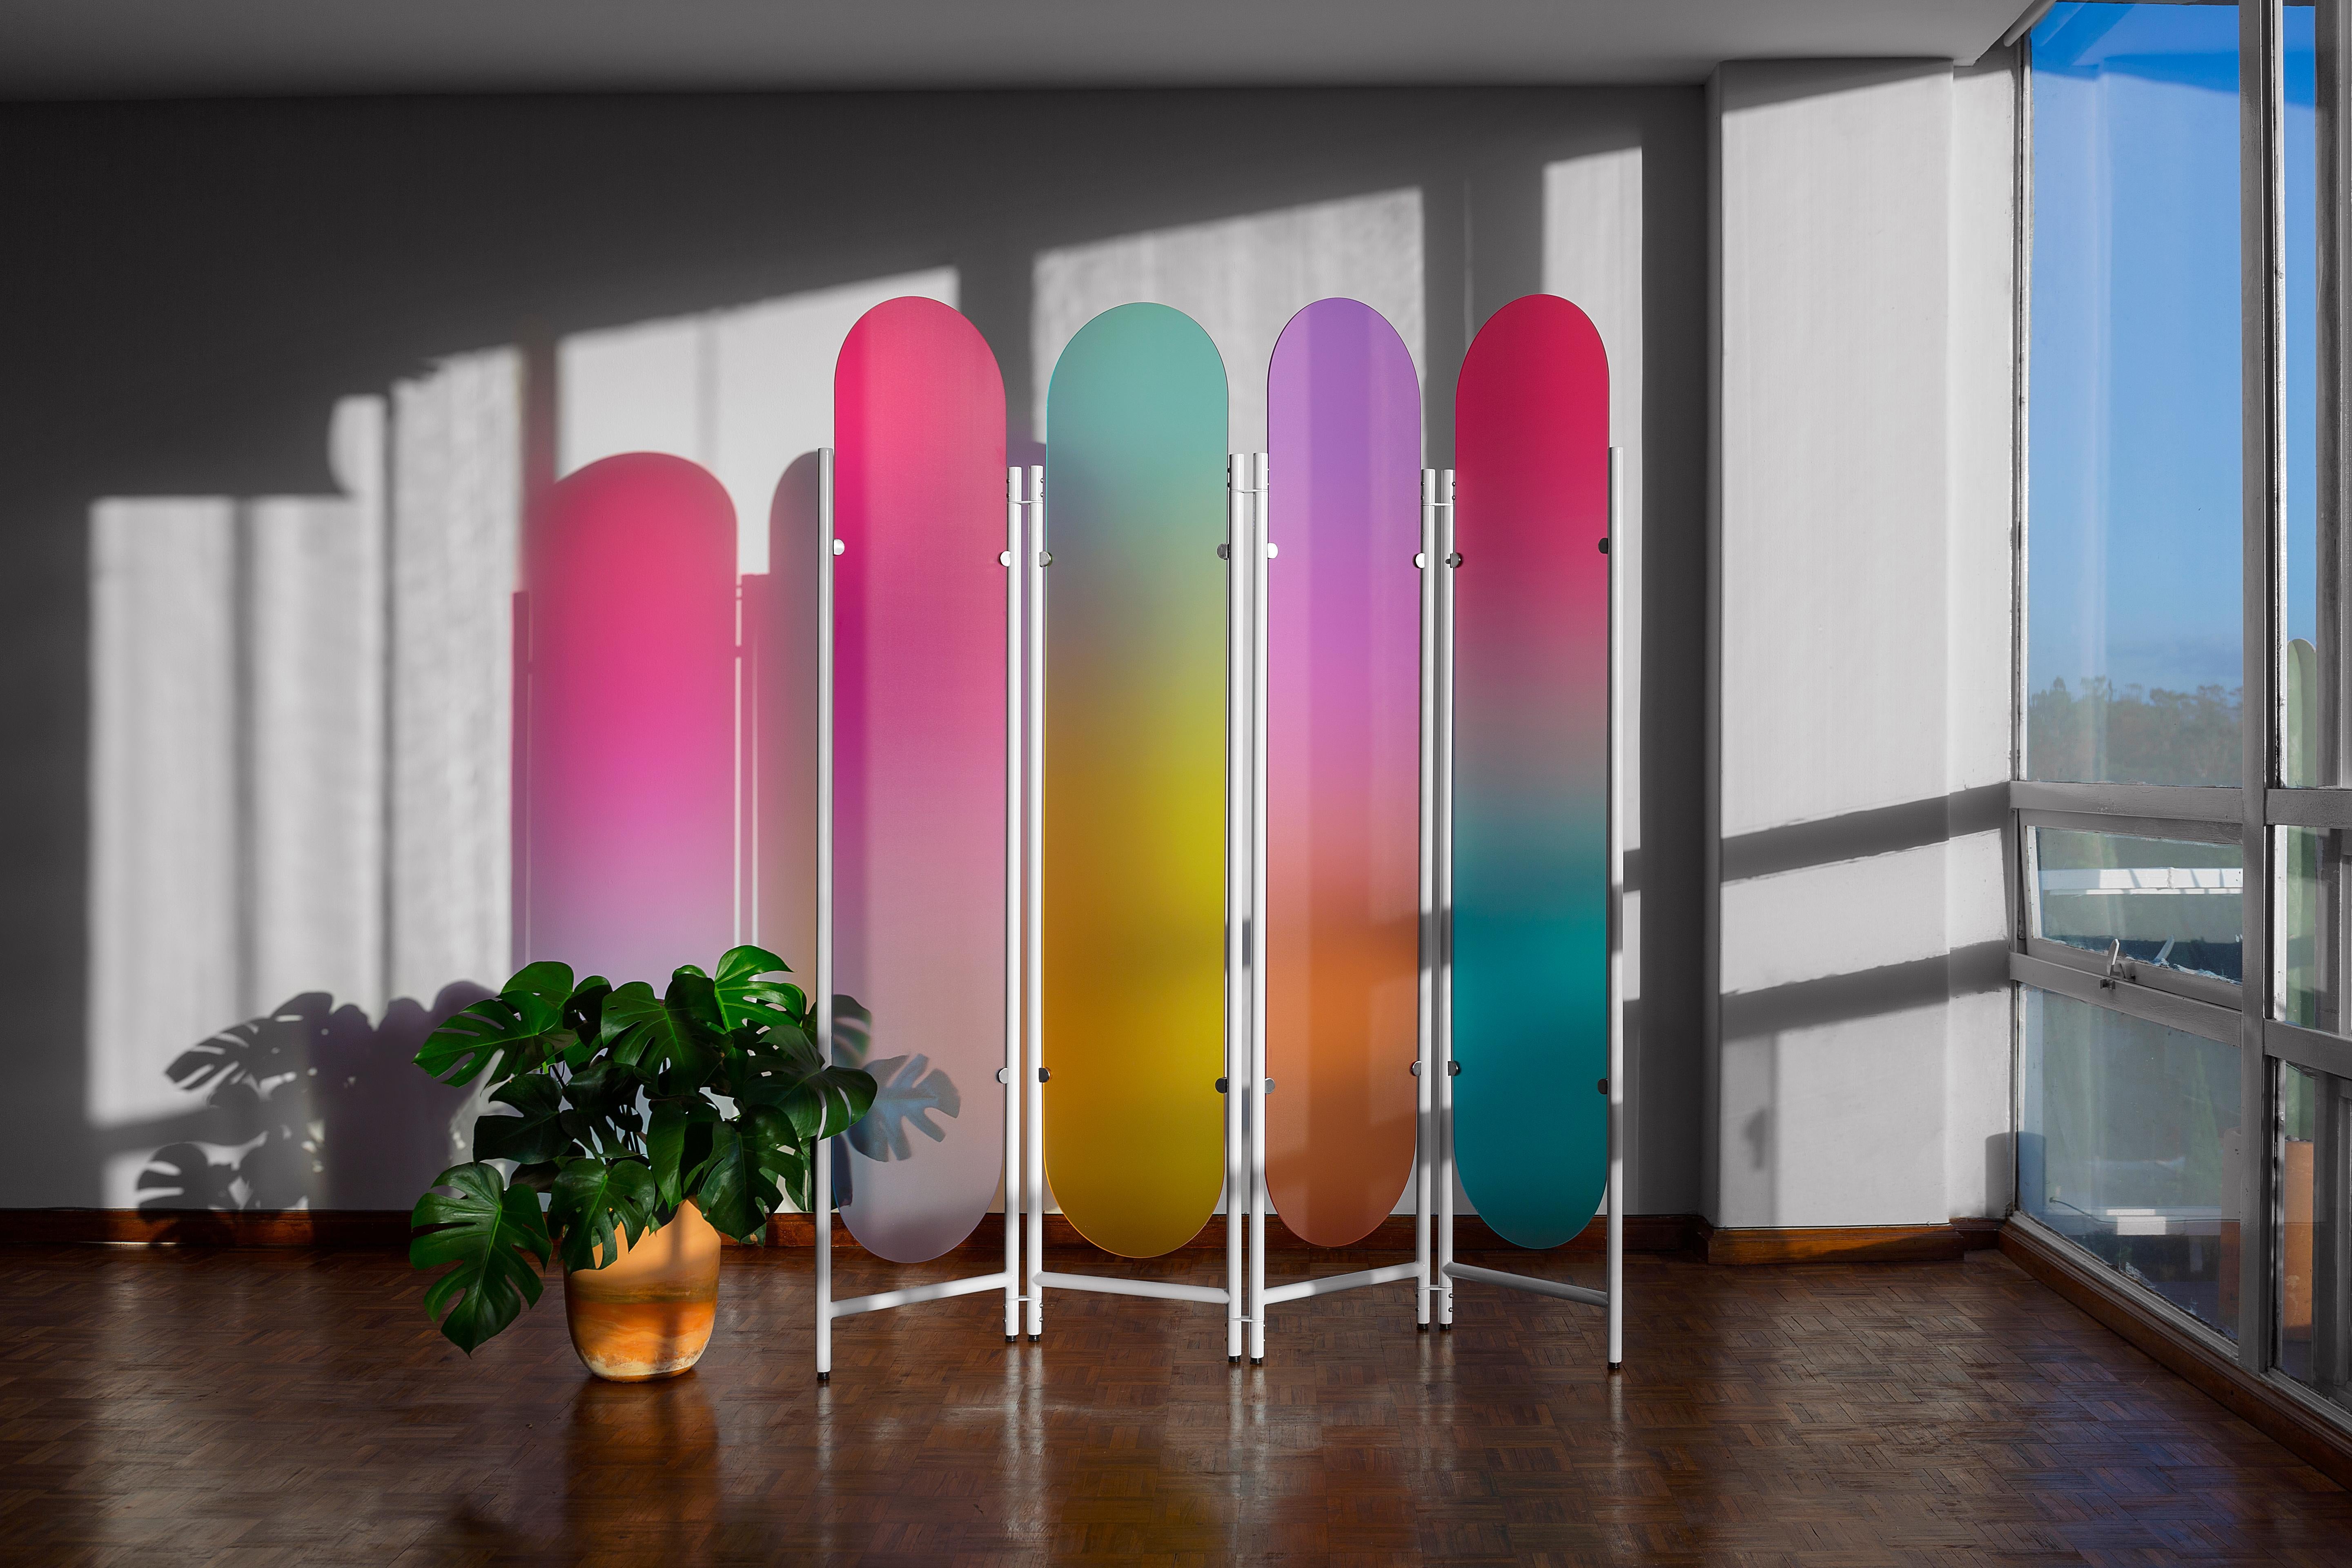 The Chroma room divider seeks to break the confines of its own materiality.
By filtering the light through, it magnifies its presence creating an effect where different shades of color mix and flood the space it inhabits
What happens if we think